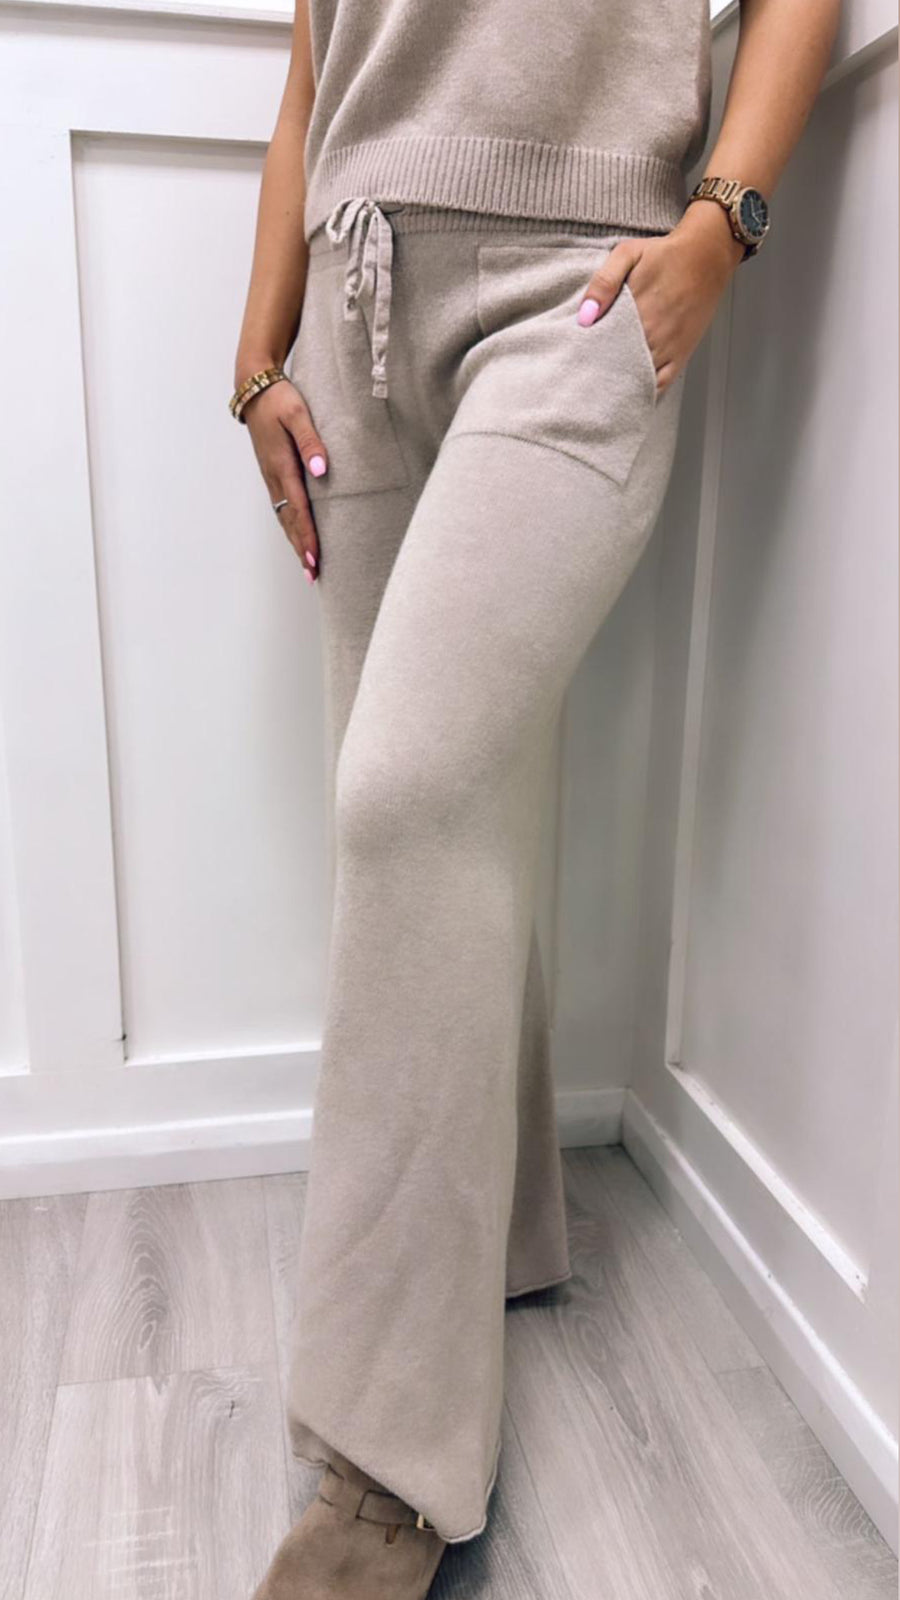 Sarl Long Trousers Taupe